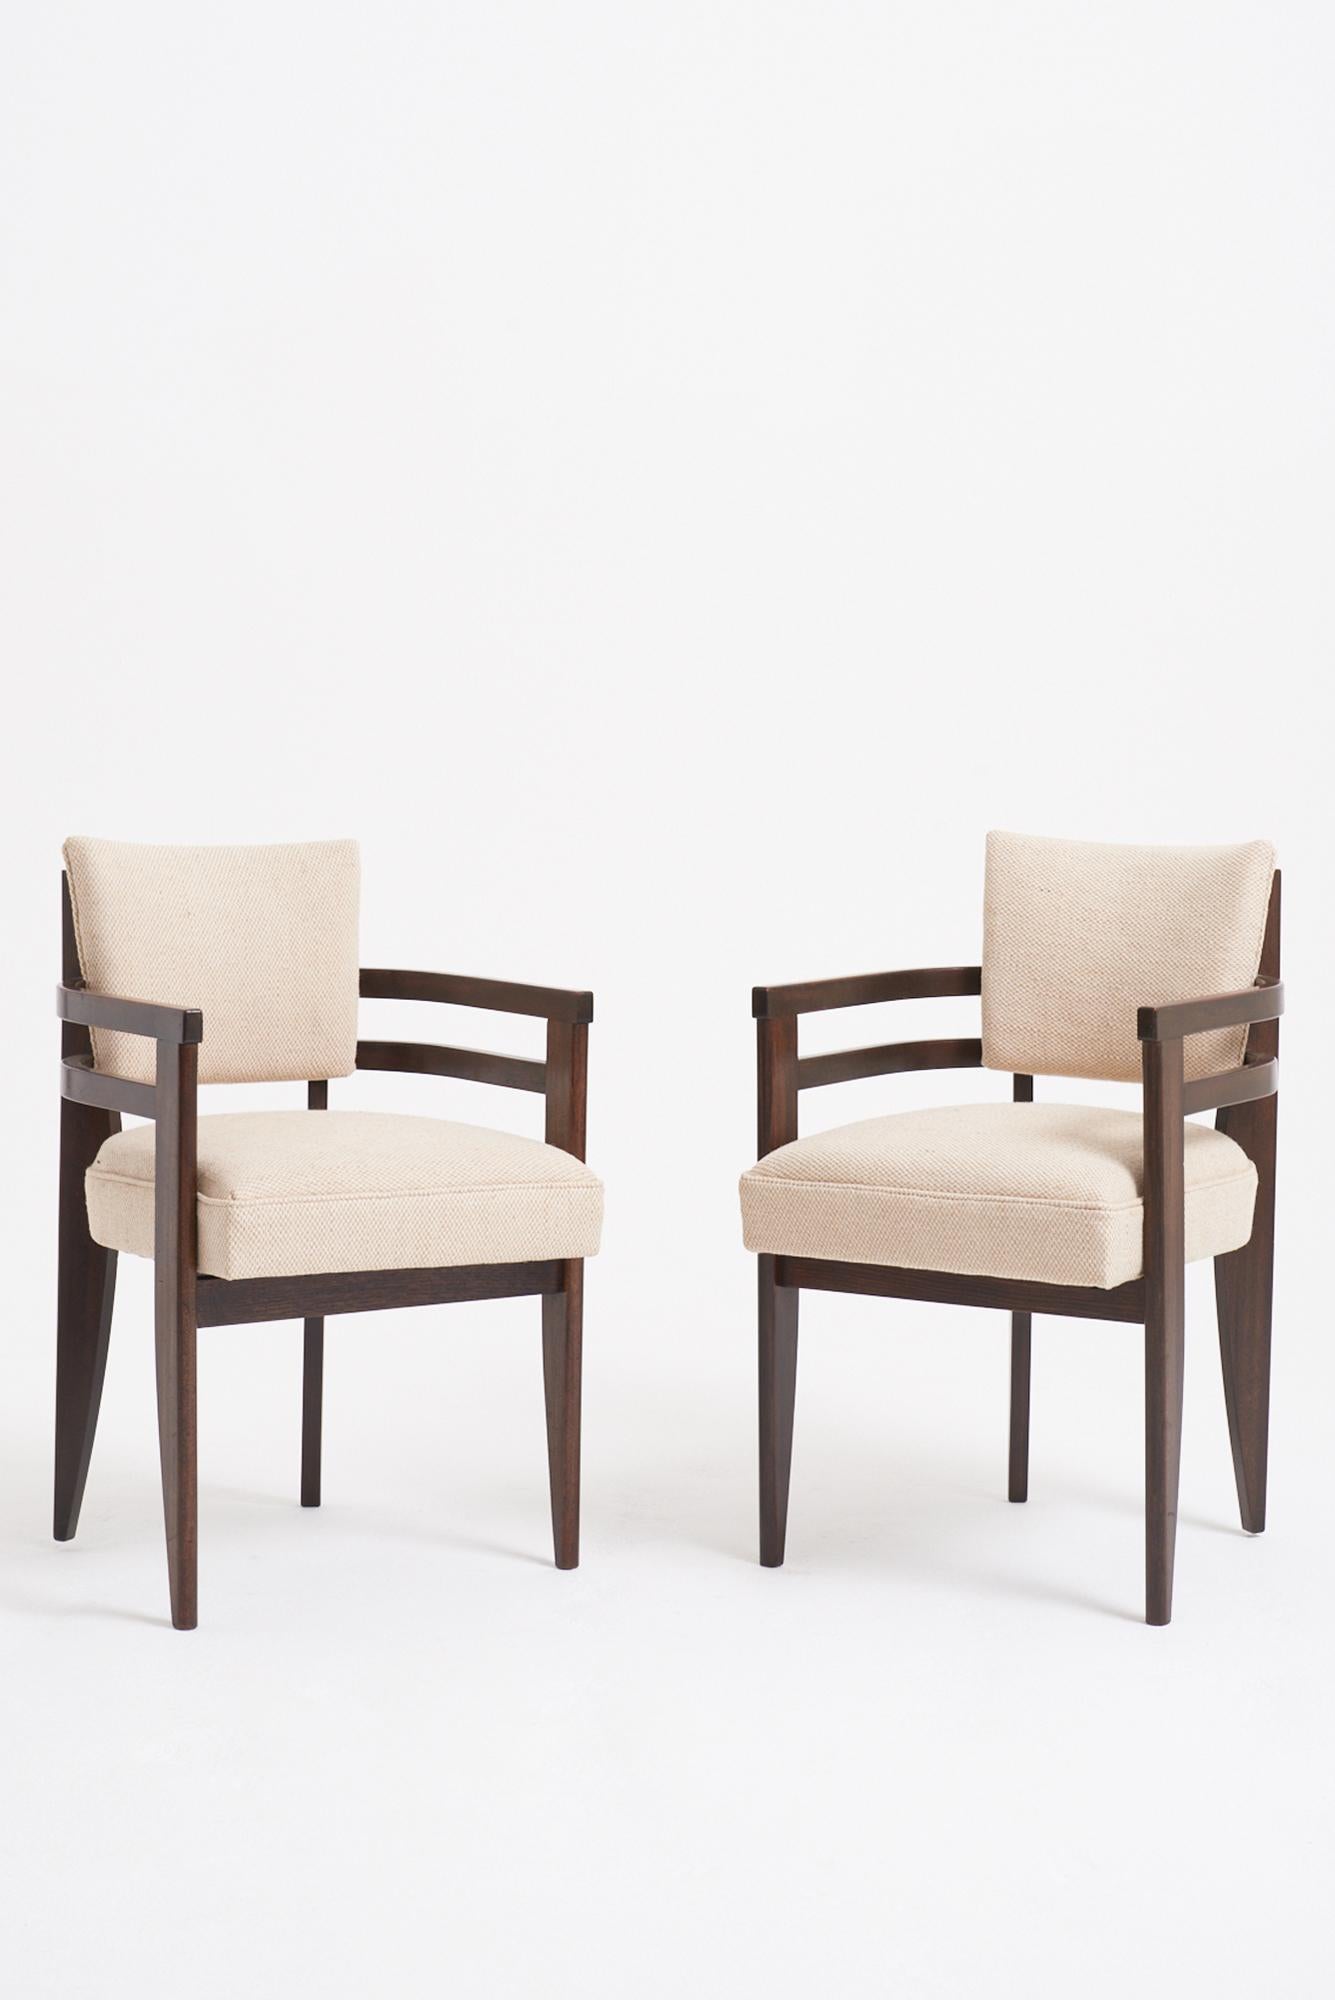 A pair of mahogany armchairs, in the manner of André Sornay. 
France, Circa 1930
78.5 cm high by 50 cm wide by 52 cm depth, seat height 47 cm